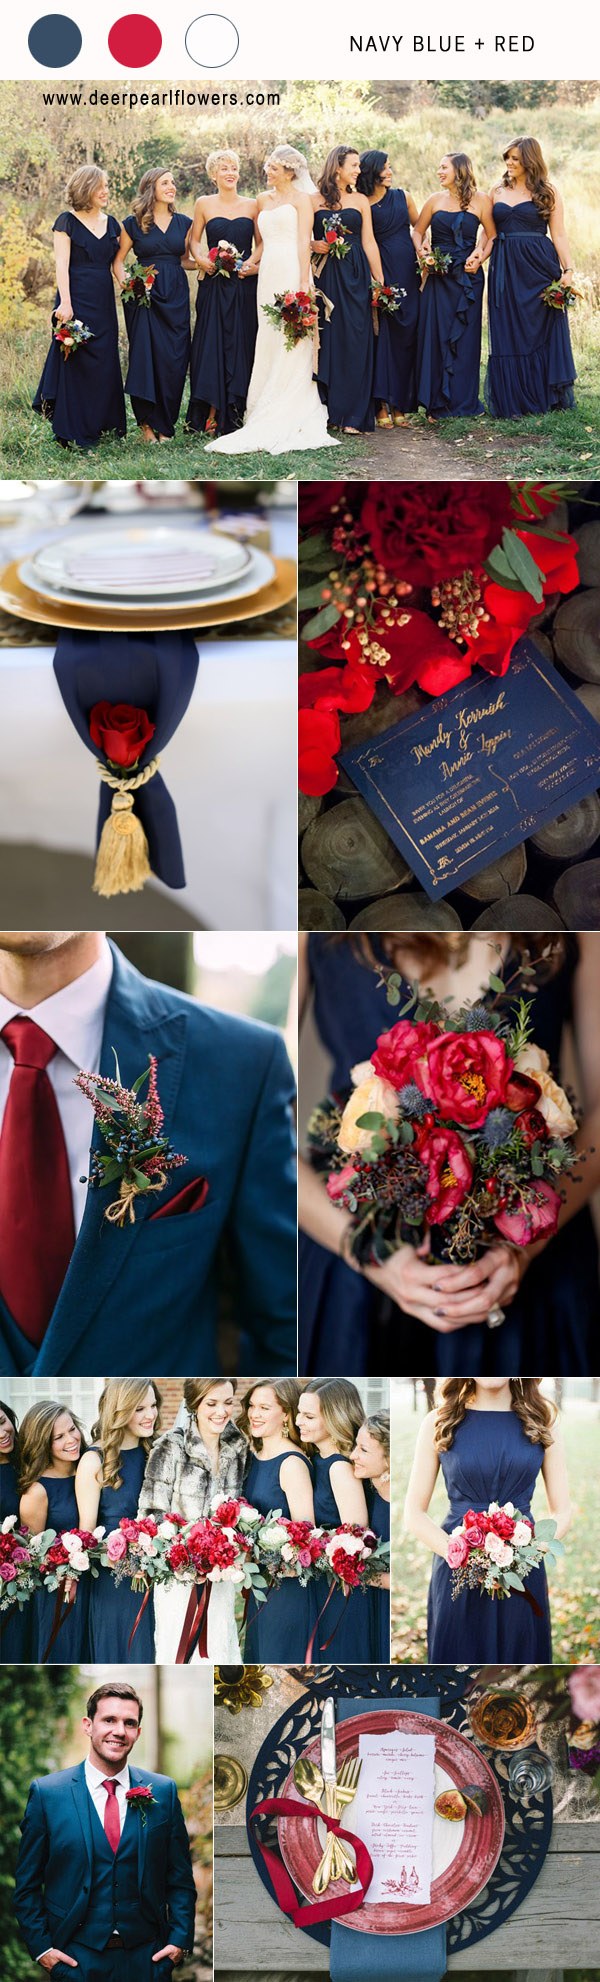 navy blue and red fall wedding color combo ideas for 2018